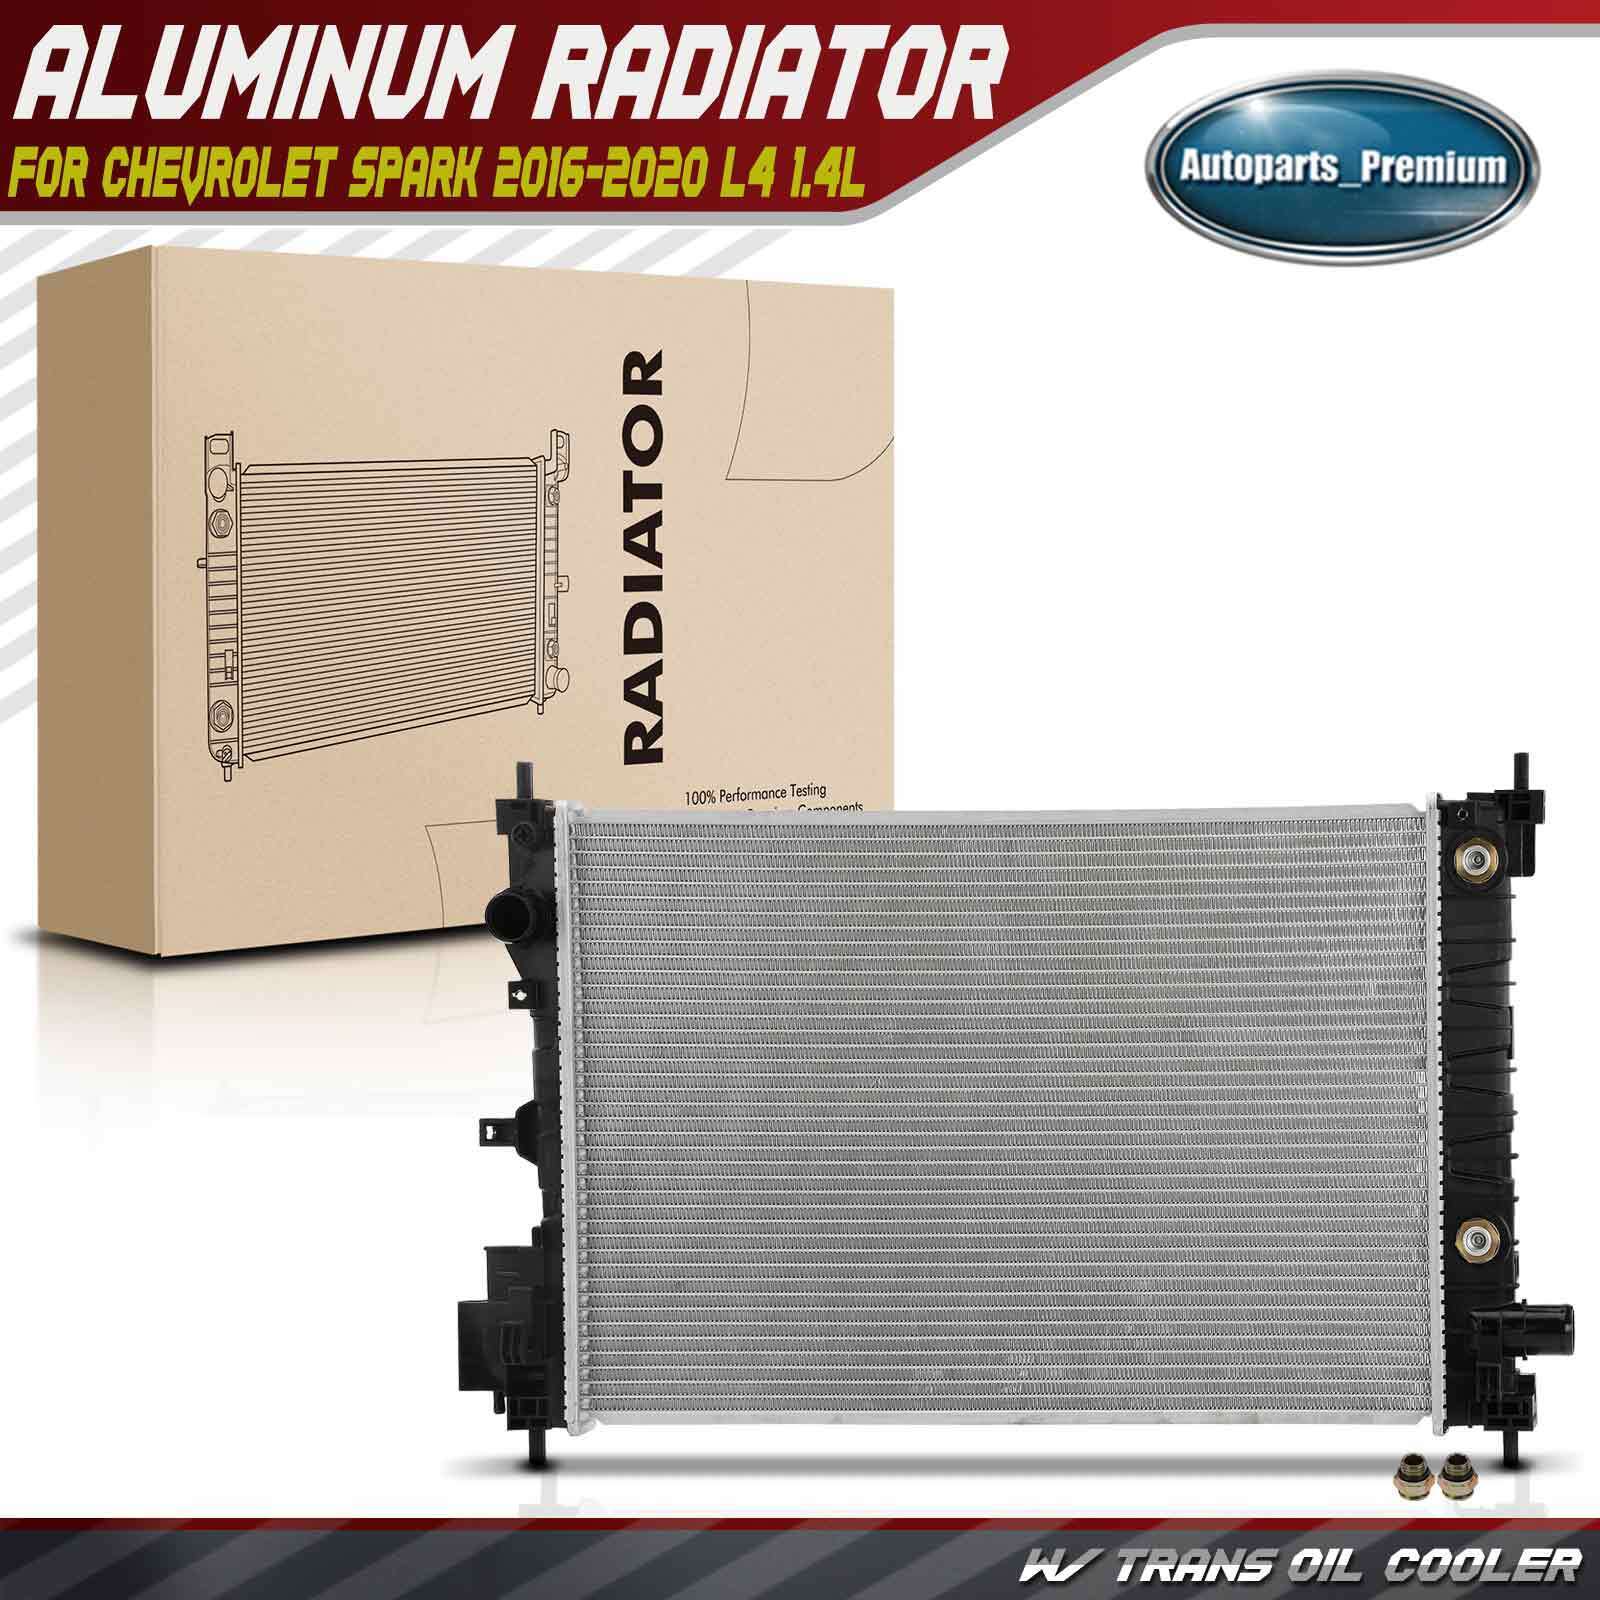 Radiator with Trans Oil Cooler for Chevrolet Spark 2016-2020 L4 1.4L Automatic